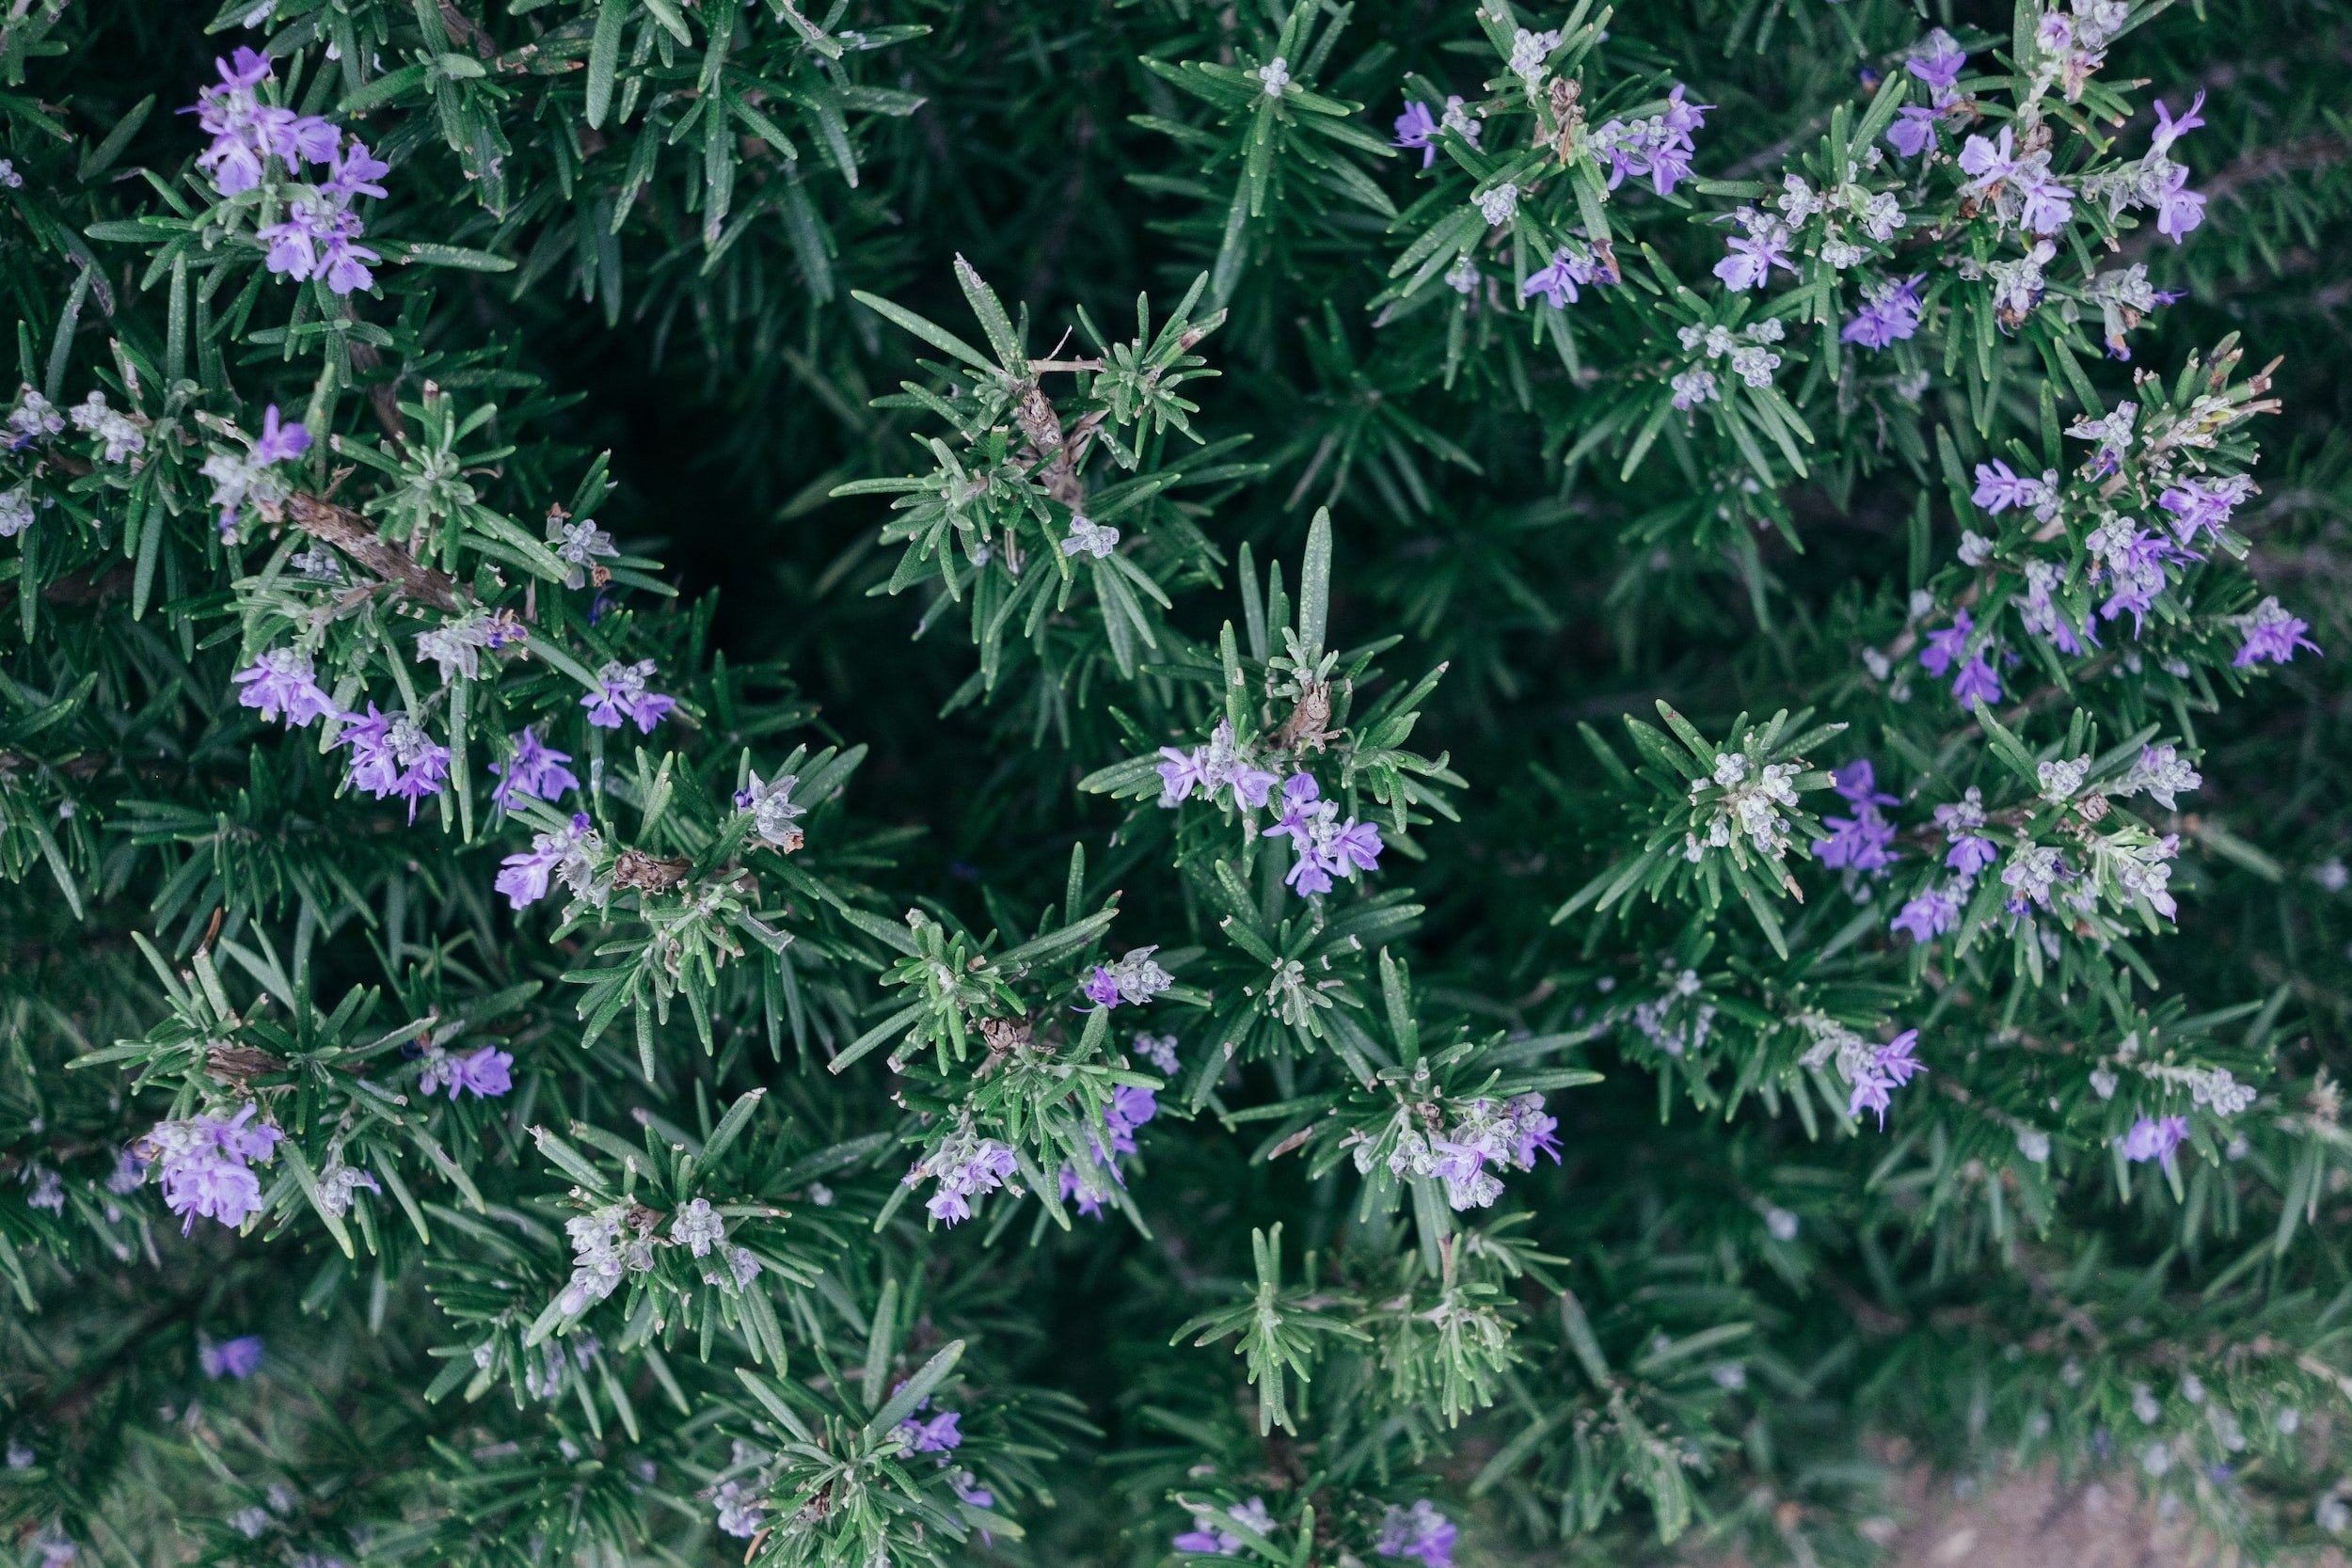 How to Dry Rosemary, Step by Step